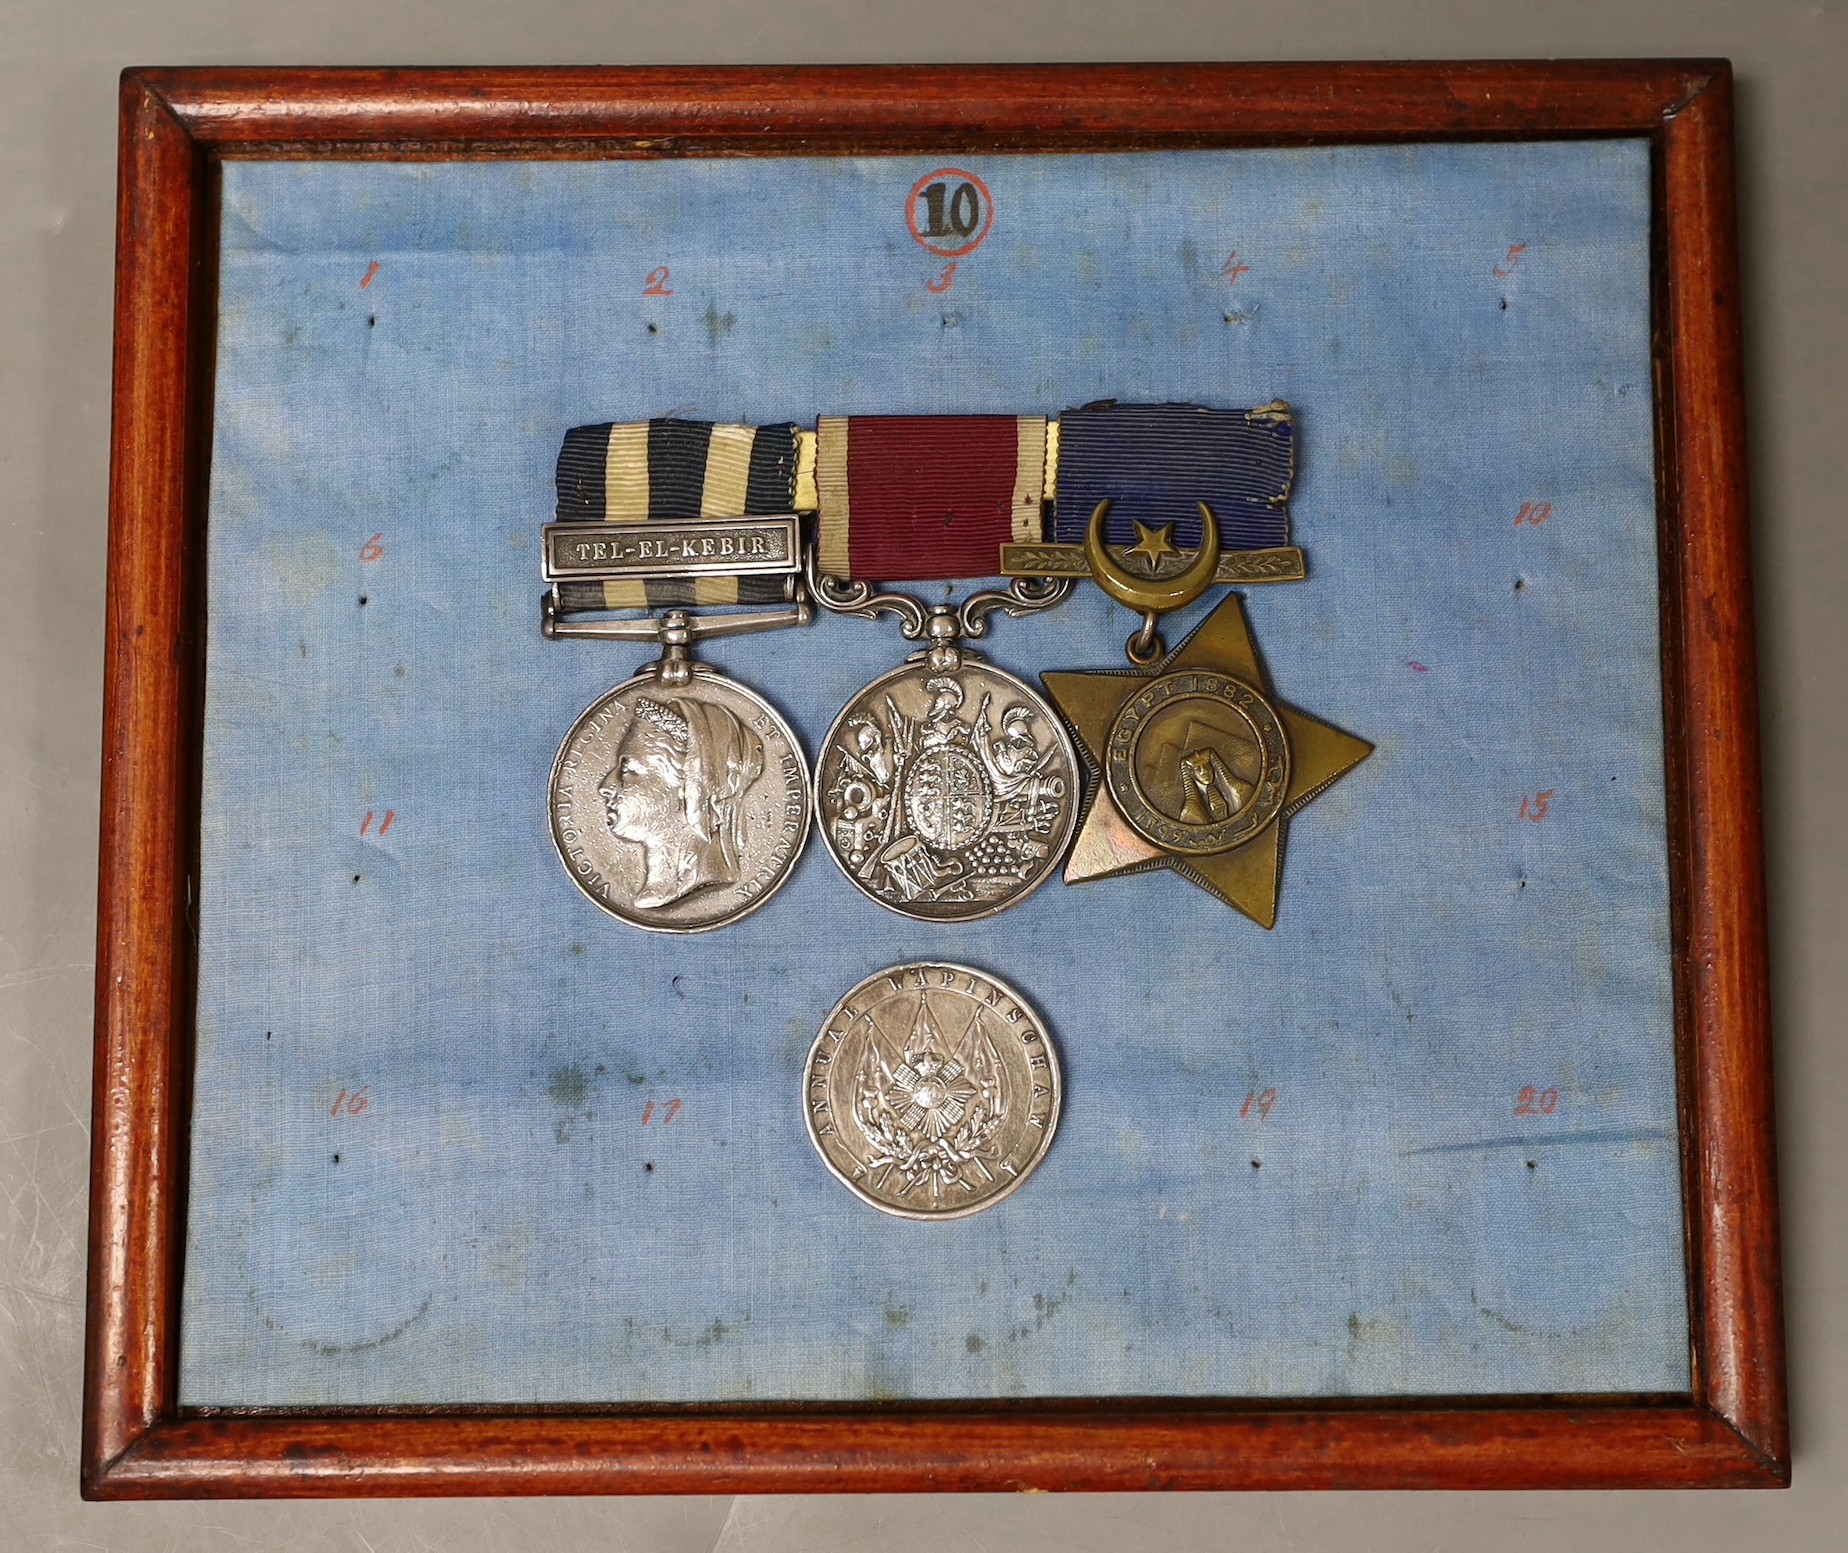 Egypt 1882 medal with Tel-El-Kebir clasp to 1603 Pte A Hill. 2/Highland L I, Khedive Star, Scottish Rifles with Long Service and Good Conduct medal and 2nd H. L. I. Championship medal awarded to Pte Alfred Hill 1887